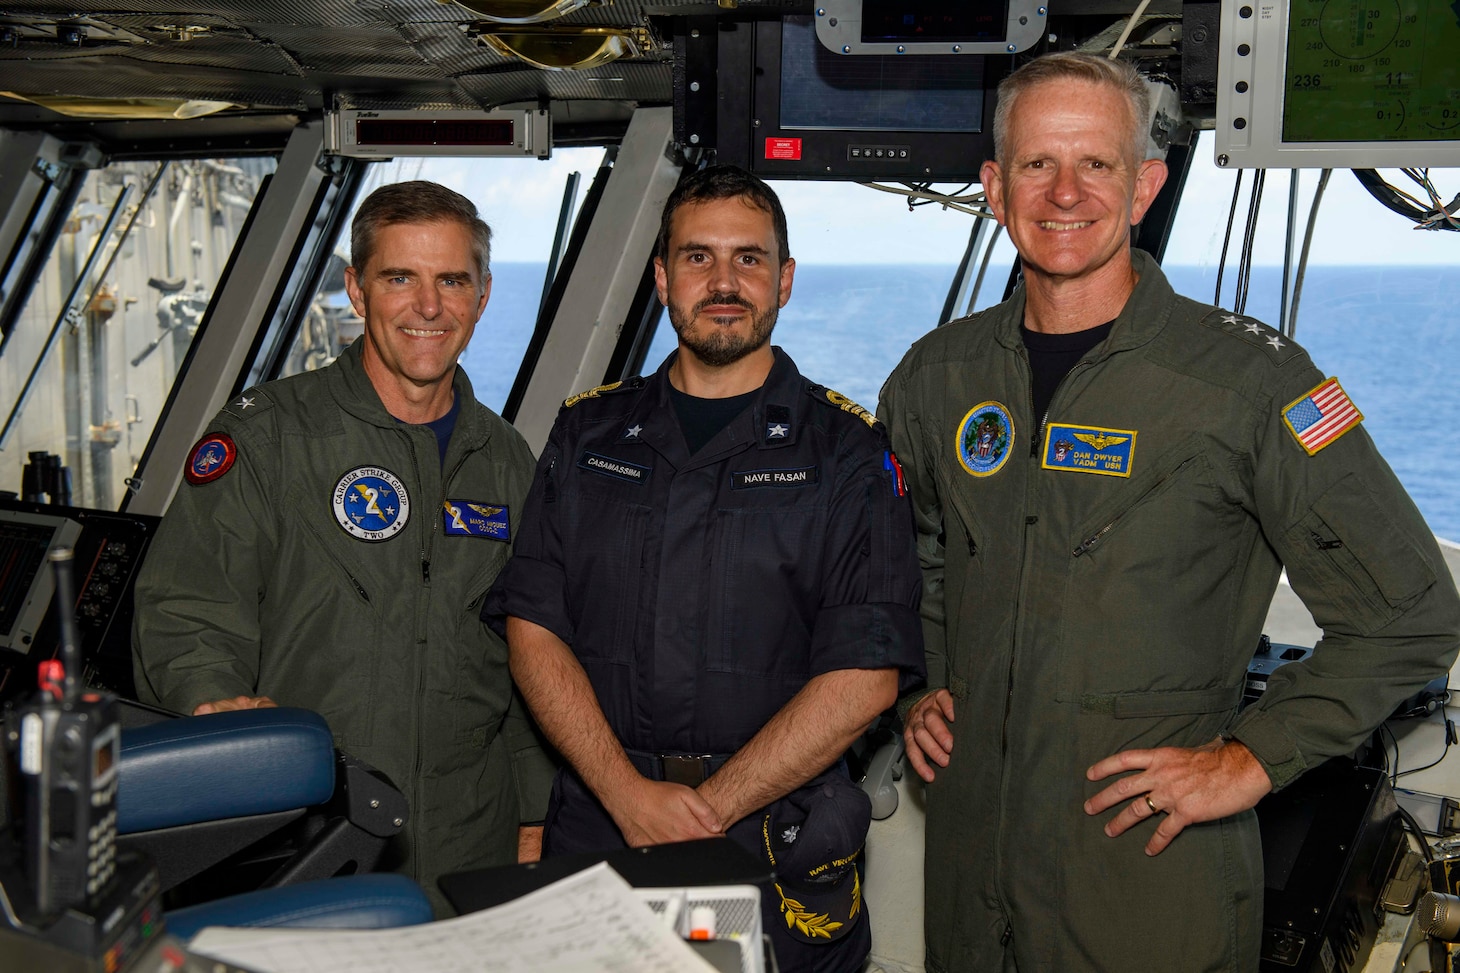 Rear Adm. Marc Miguez, commander, Carrier Strike Group Two, left, Cmdr. Fabio Casamassima, commanding officer of the Carlo Bergamini-class frigate ITS Virginio Fasan (F 591), and Vice Adm. Dan Dwyer, commander, U.S. Second Fleet, pose for a photo aboard the Nimitz-class aircraft carrier USS Dwight D. Eisenhower (CVN 69).